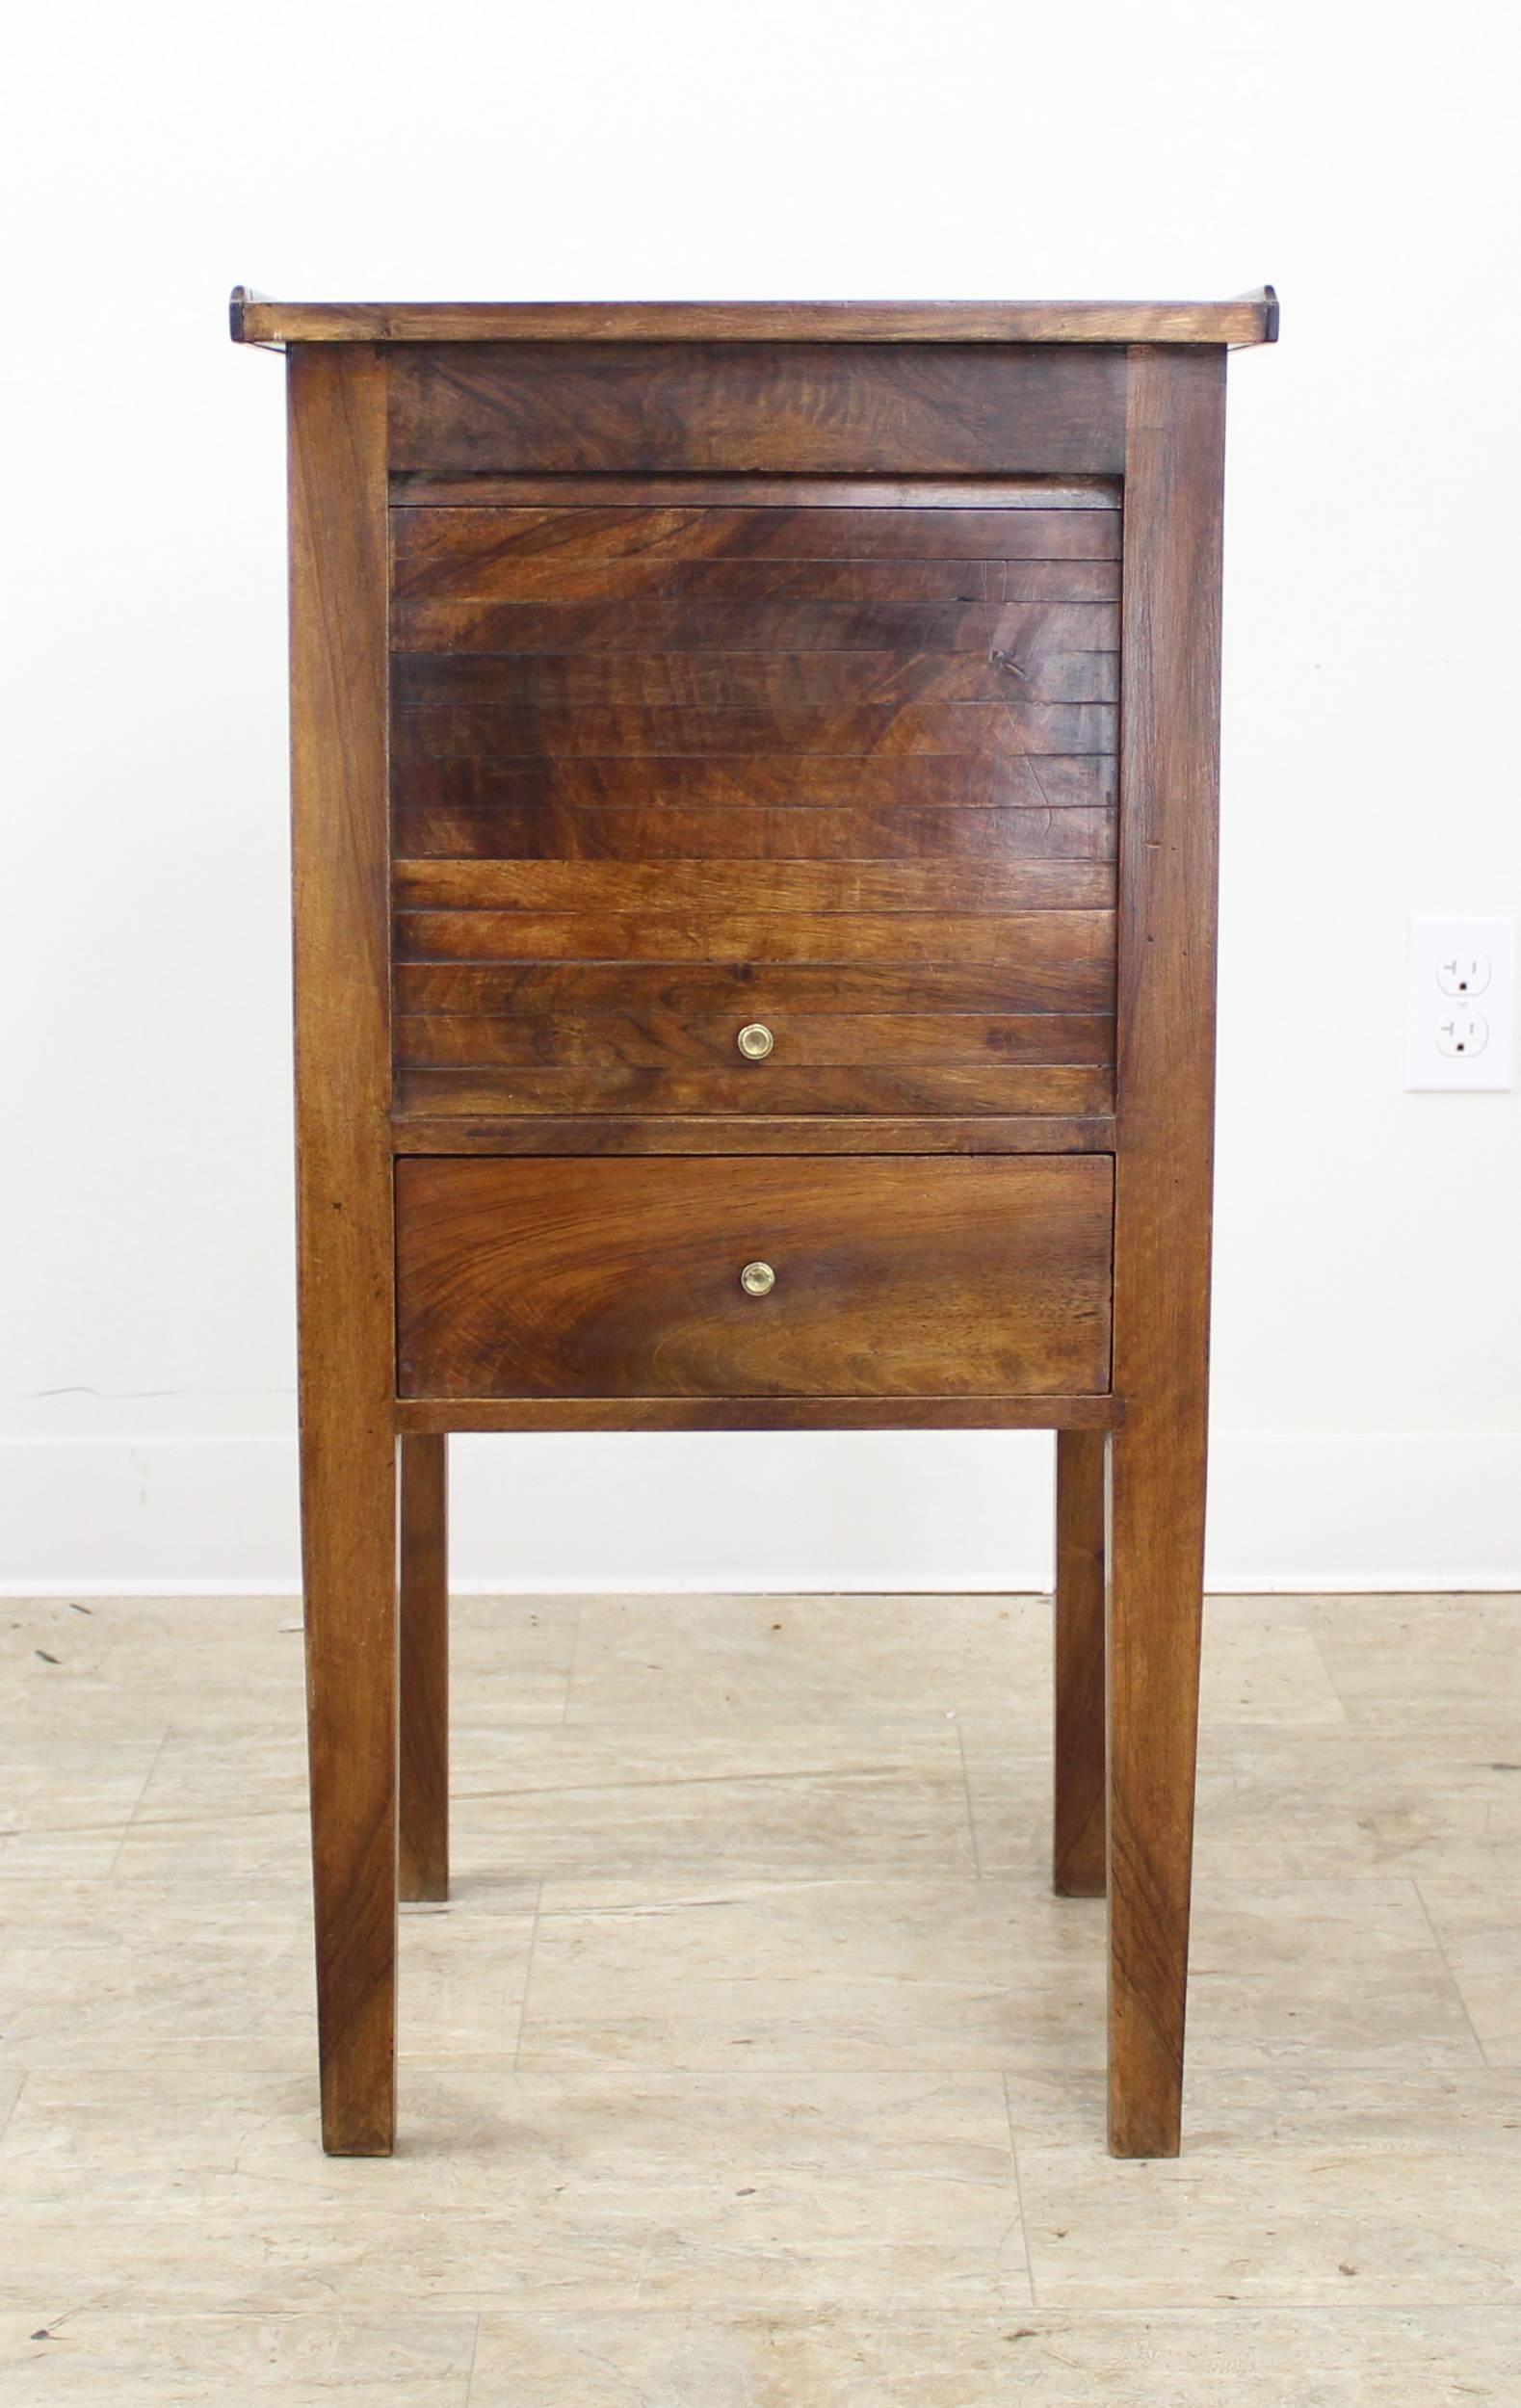 A charming elegantly scaled antique bedside cabinet from France. Made of walnut with a beautiful color and rich patina. The tambour front rolls up for interior storage. Would work next to a bed or as a side table or end table in a smaller space.